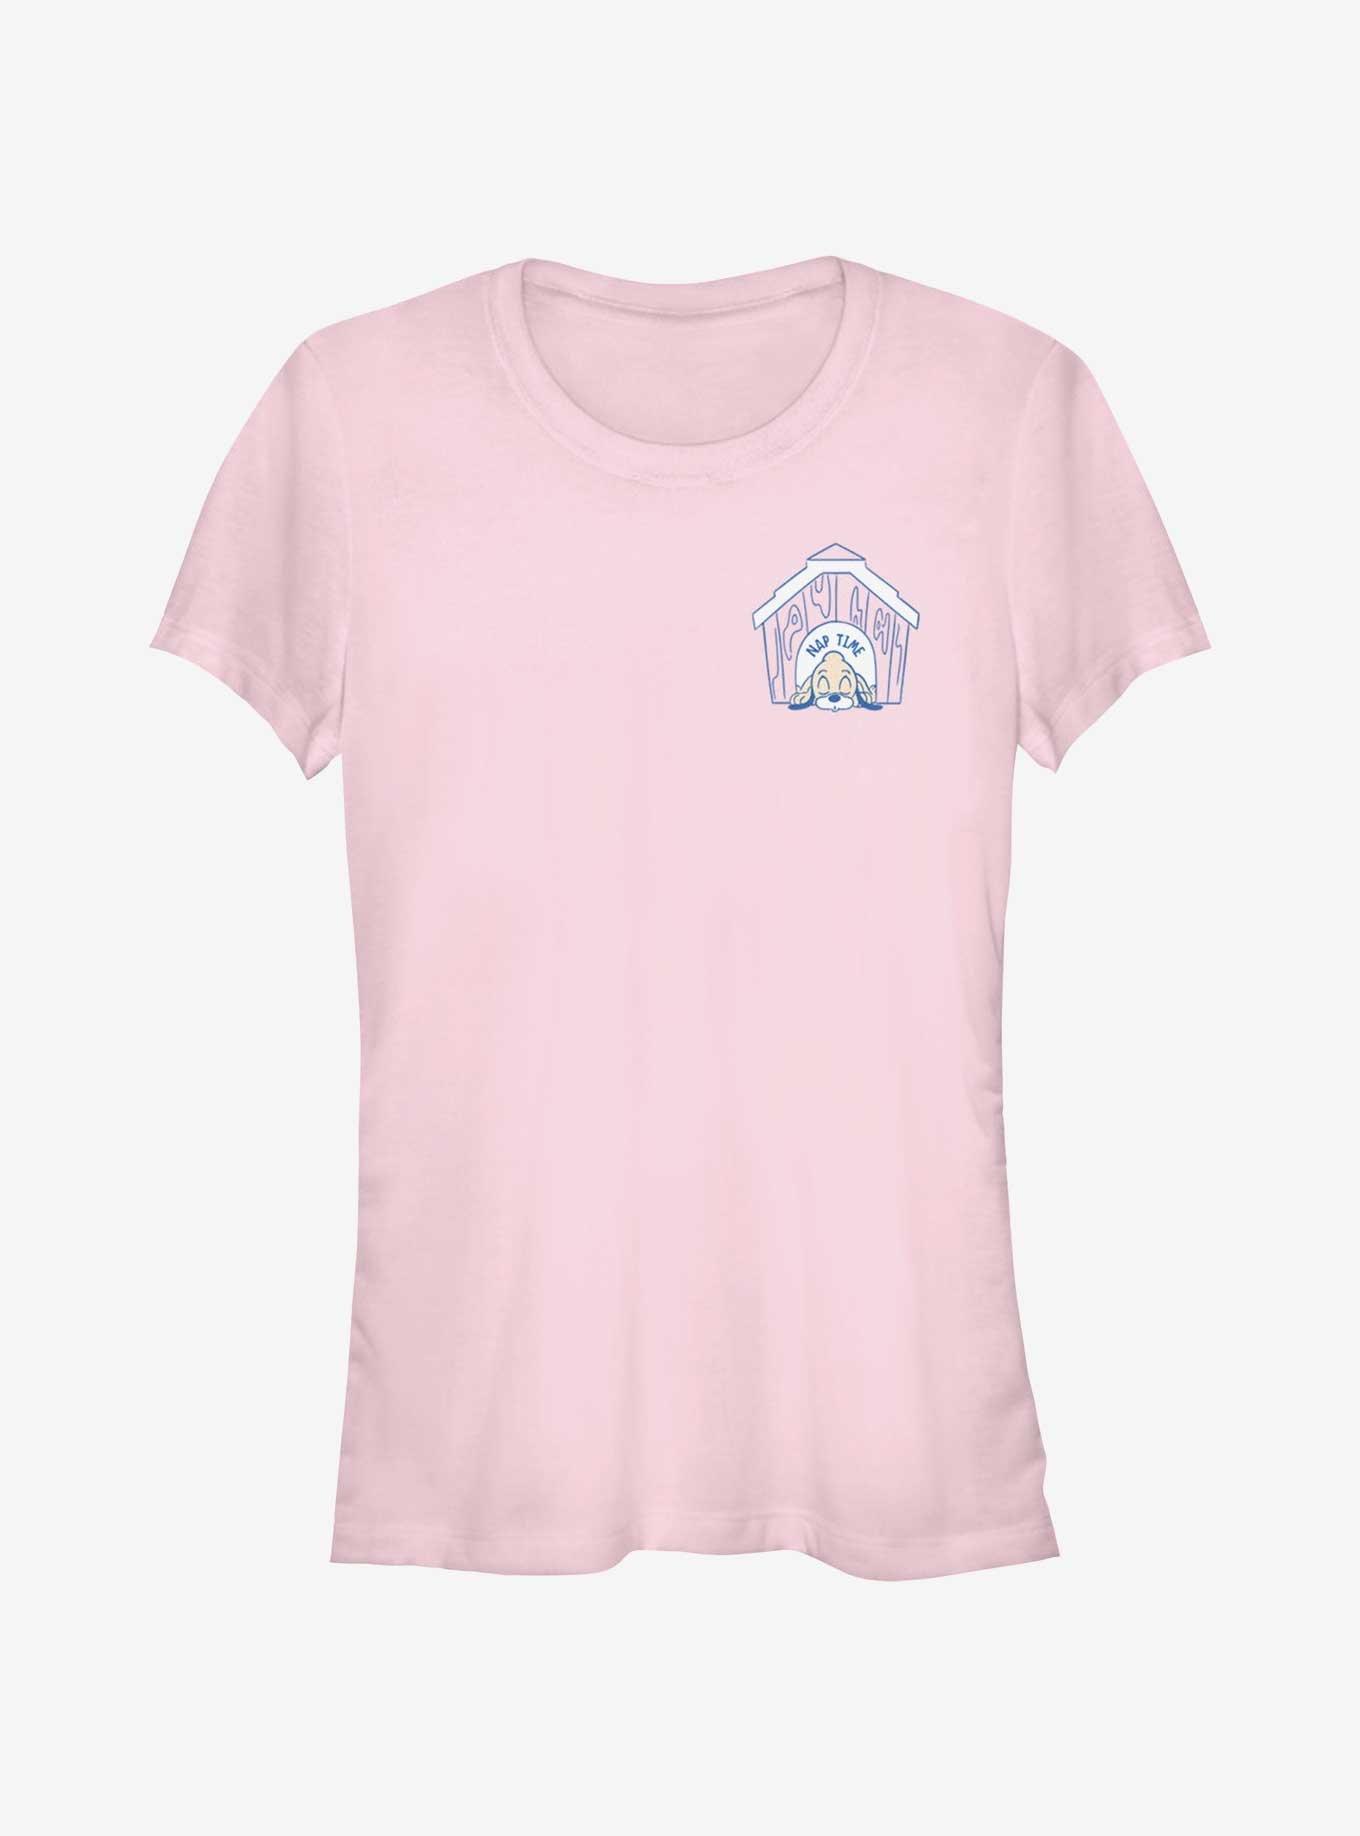 Disney Mickey Mouse Tired Doggy Pocket Girls T-Shirt, LIGHT PINK, hi-res